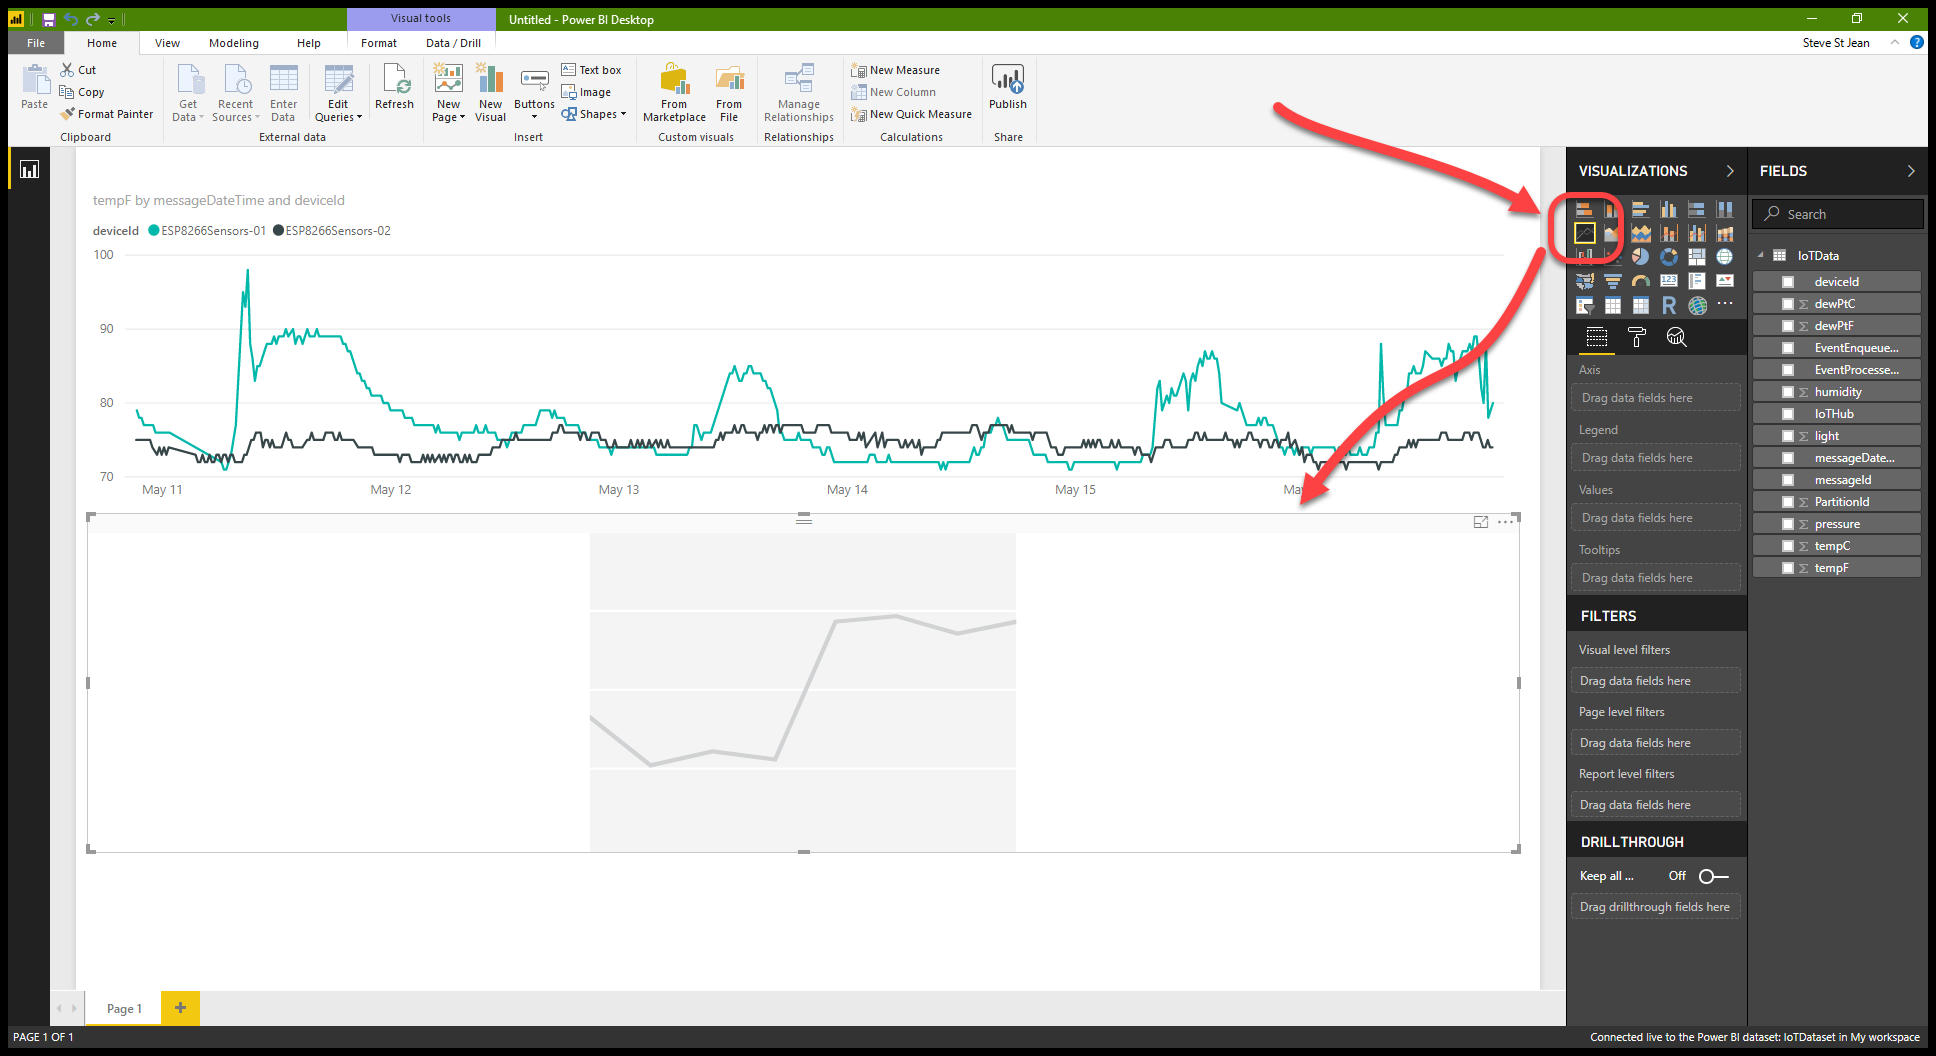 How Azure IoT helped me buy a new house - Part 6 - Power BI